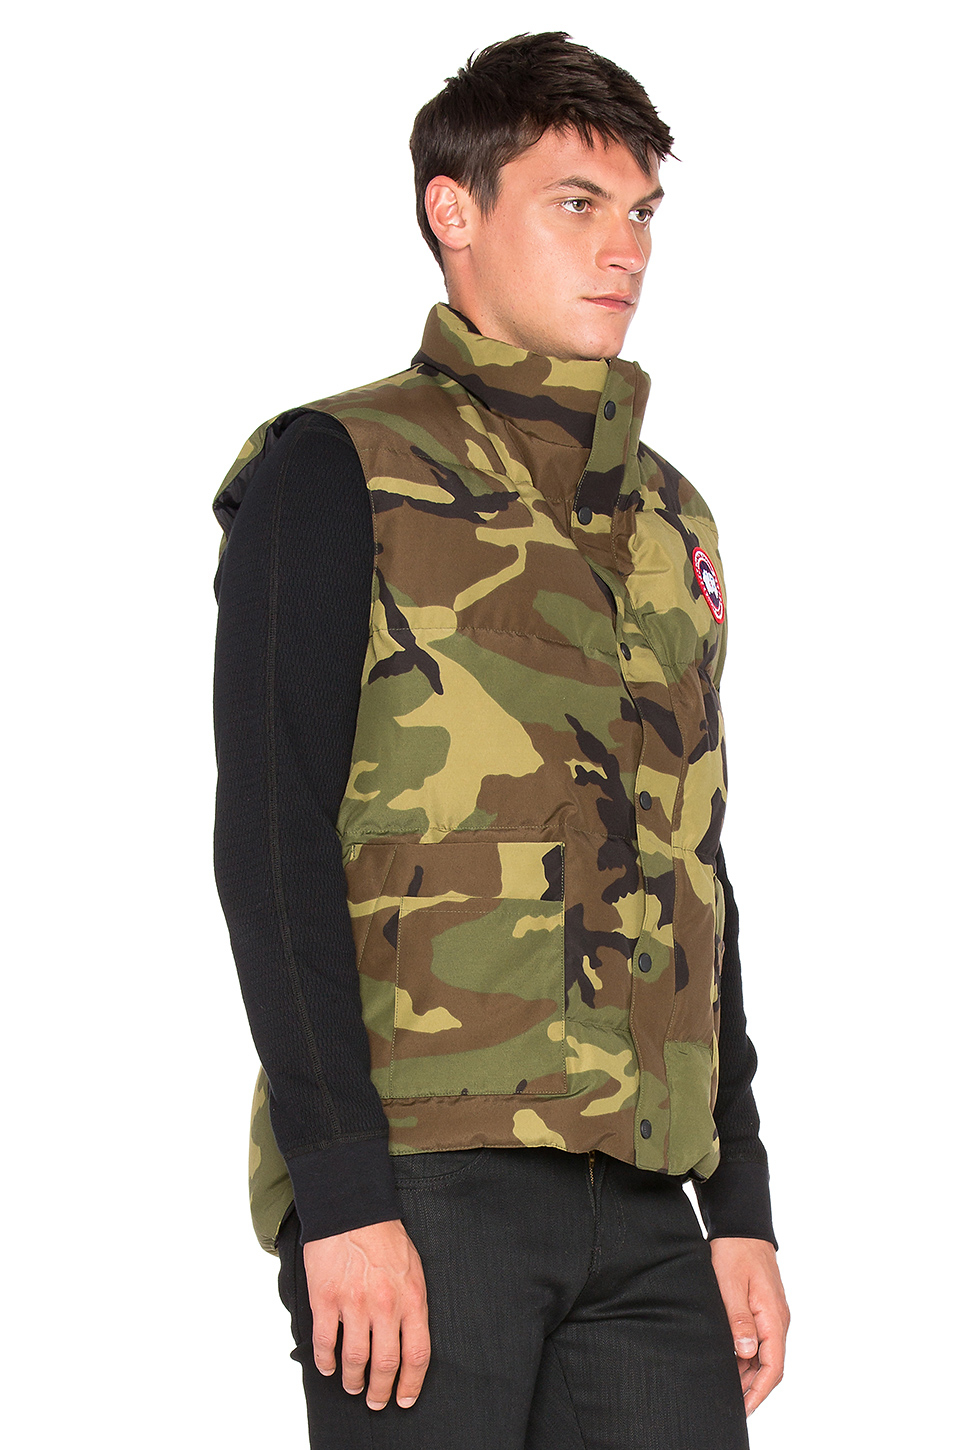 canada goose jackets on sale online canada goose freestyle vest